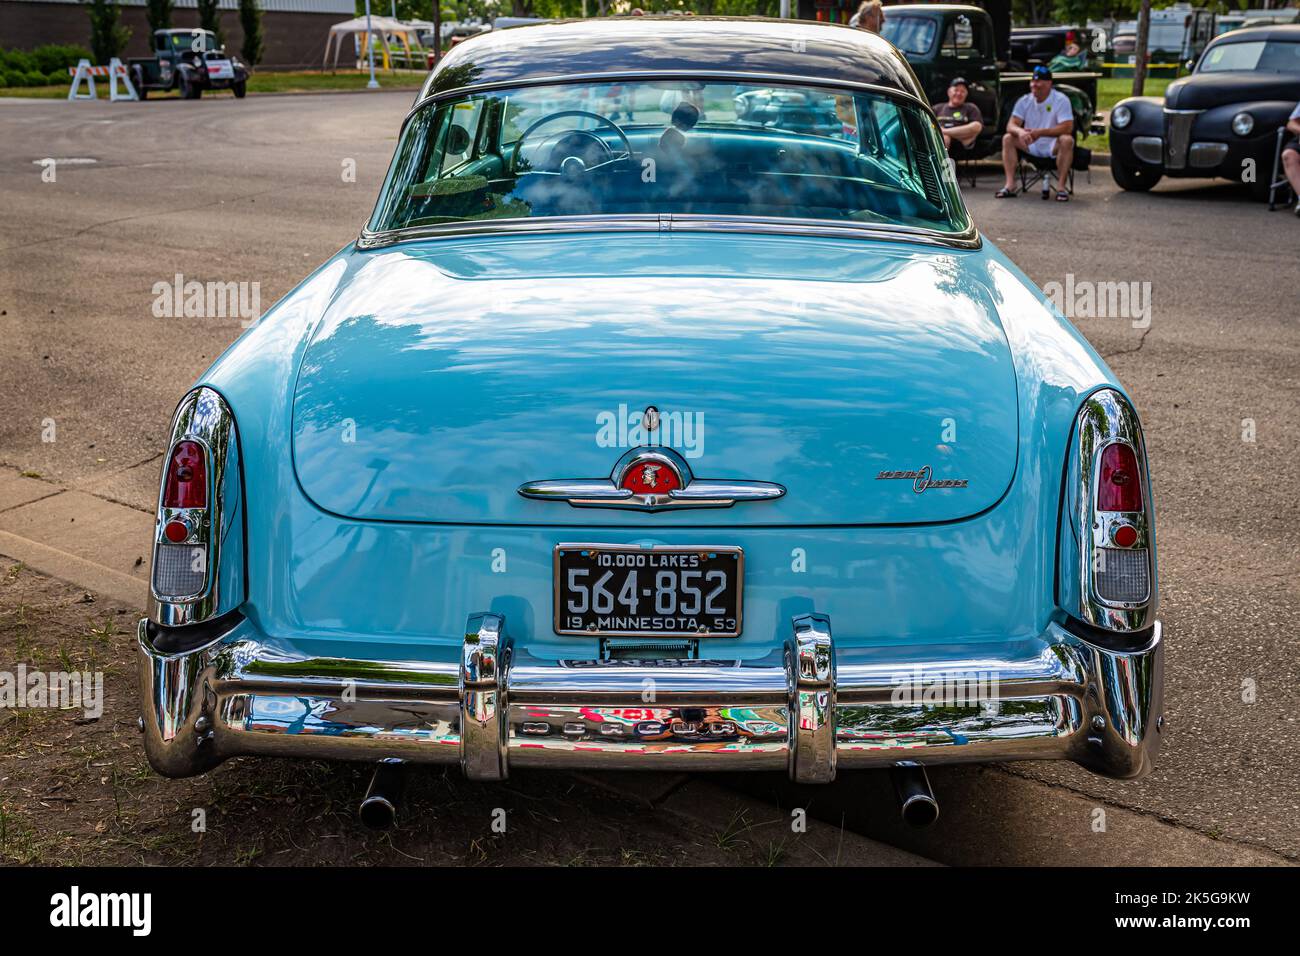 Falcon Heights, MN - June 19, 2022: High perspective rear view of a 1953 Mercury Monterey Hardtop Coupe at a local car show. Stock Photo